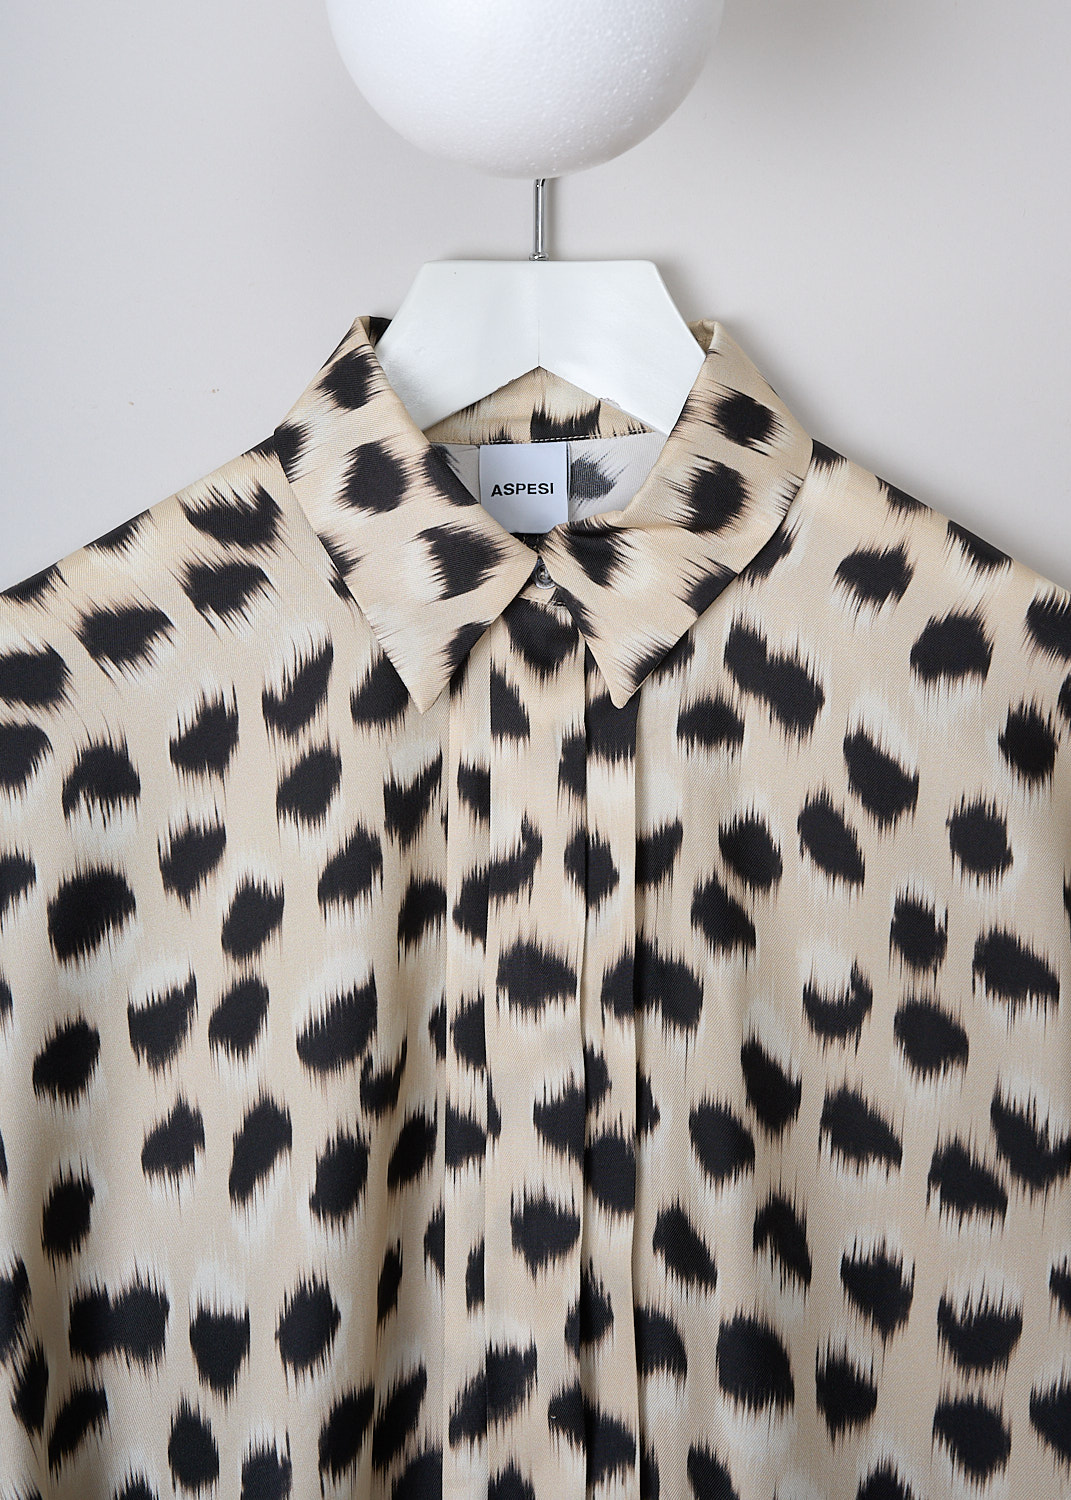 ASPESI, FADED ANIMAL PRINT BLOUSE, 5456_V592_60113, Beige, Print, Black, Detail, This beige blouse with faded animal print features a classic collar, a concealed front button closure and Dolman sleeves with buttoned cuffs. The blouse has a pleated back and a slightly rounded hemline. 
